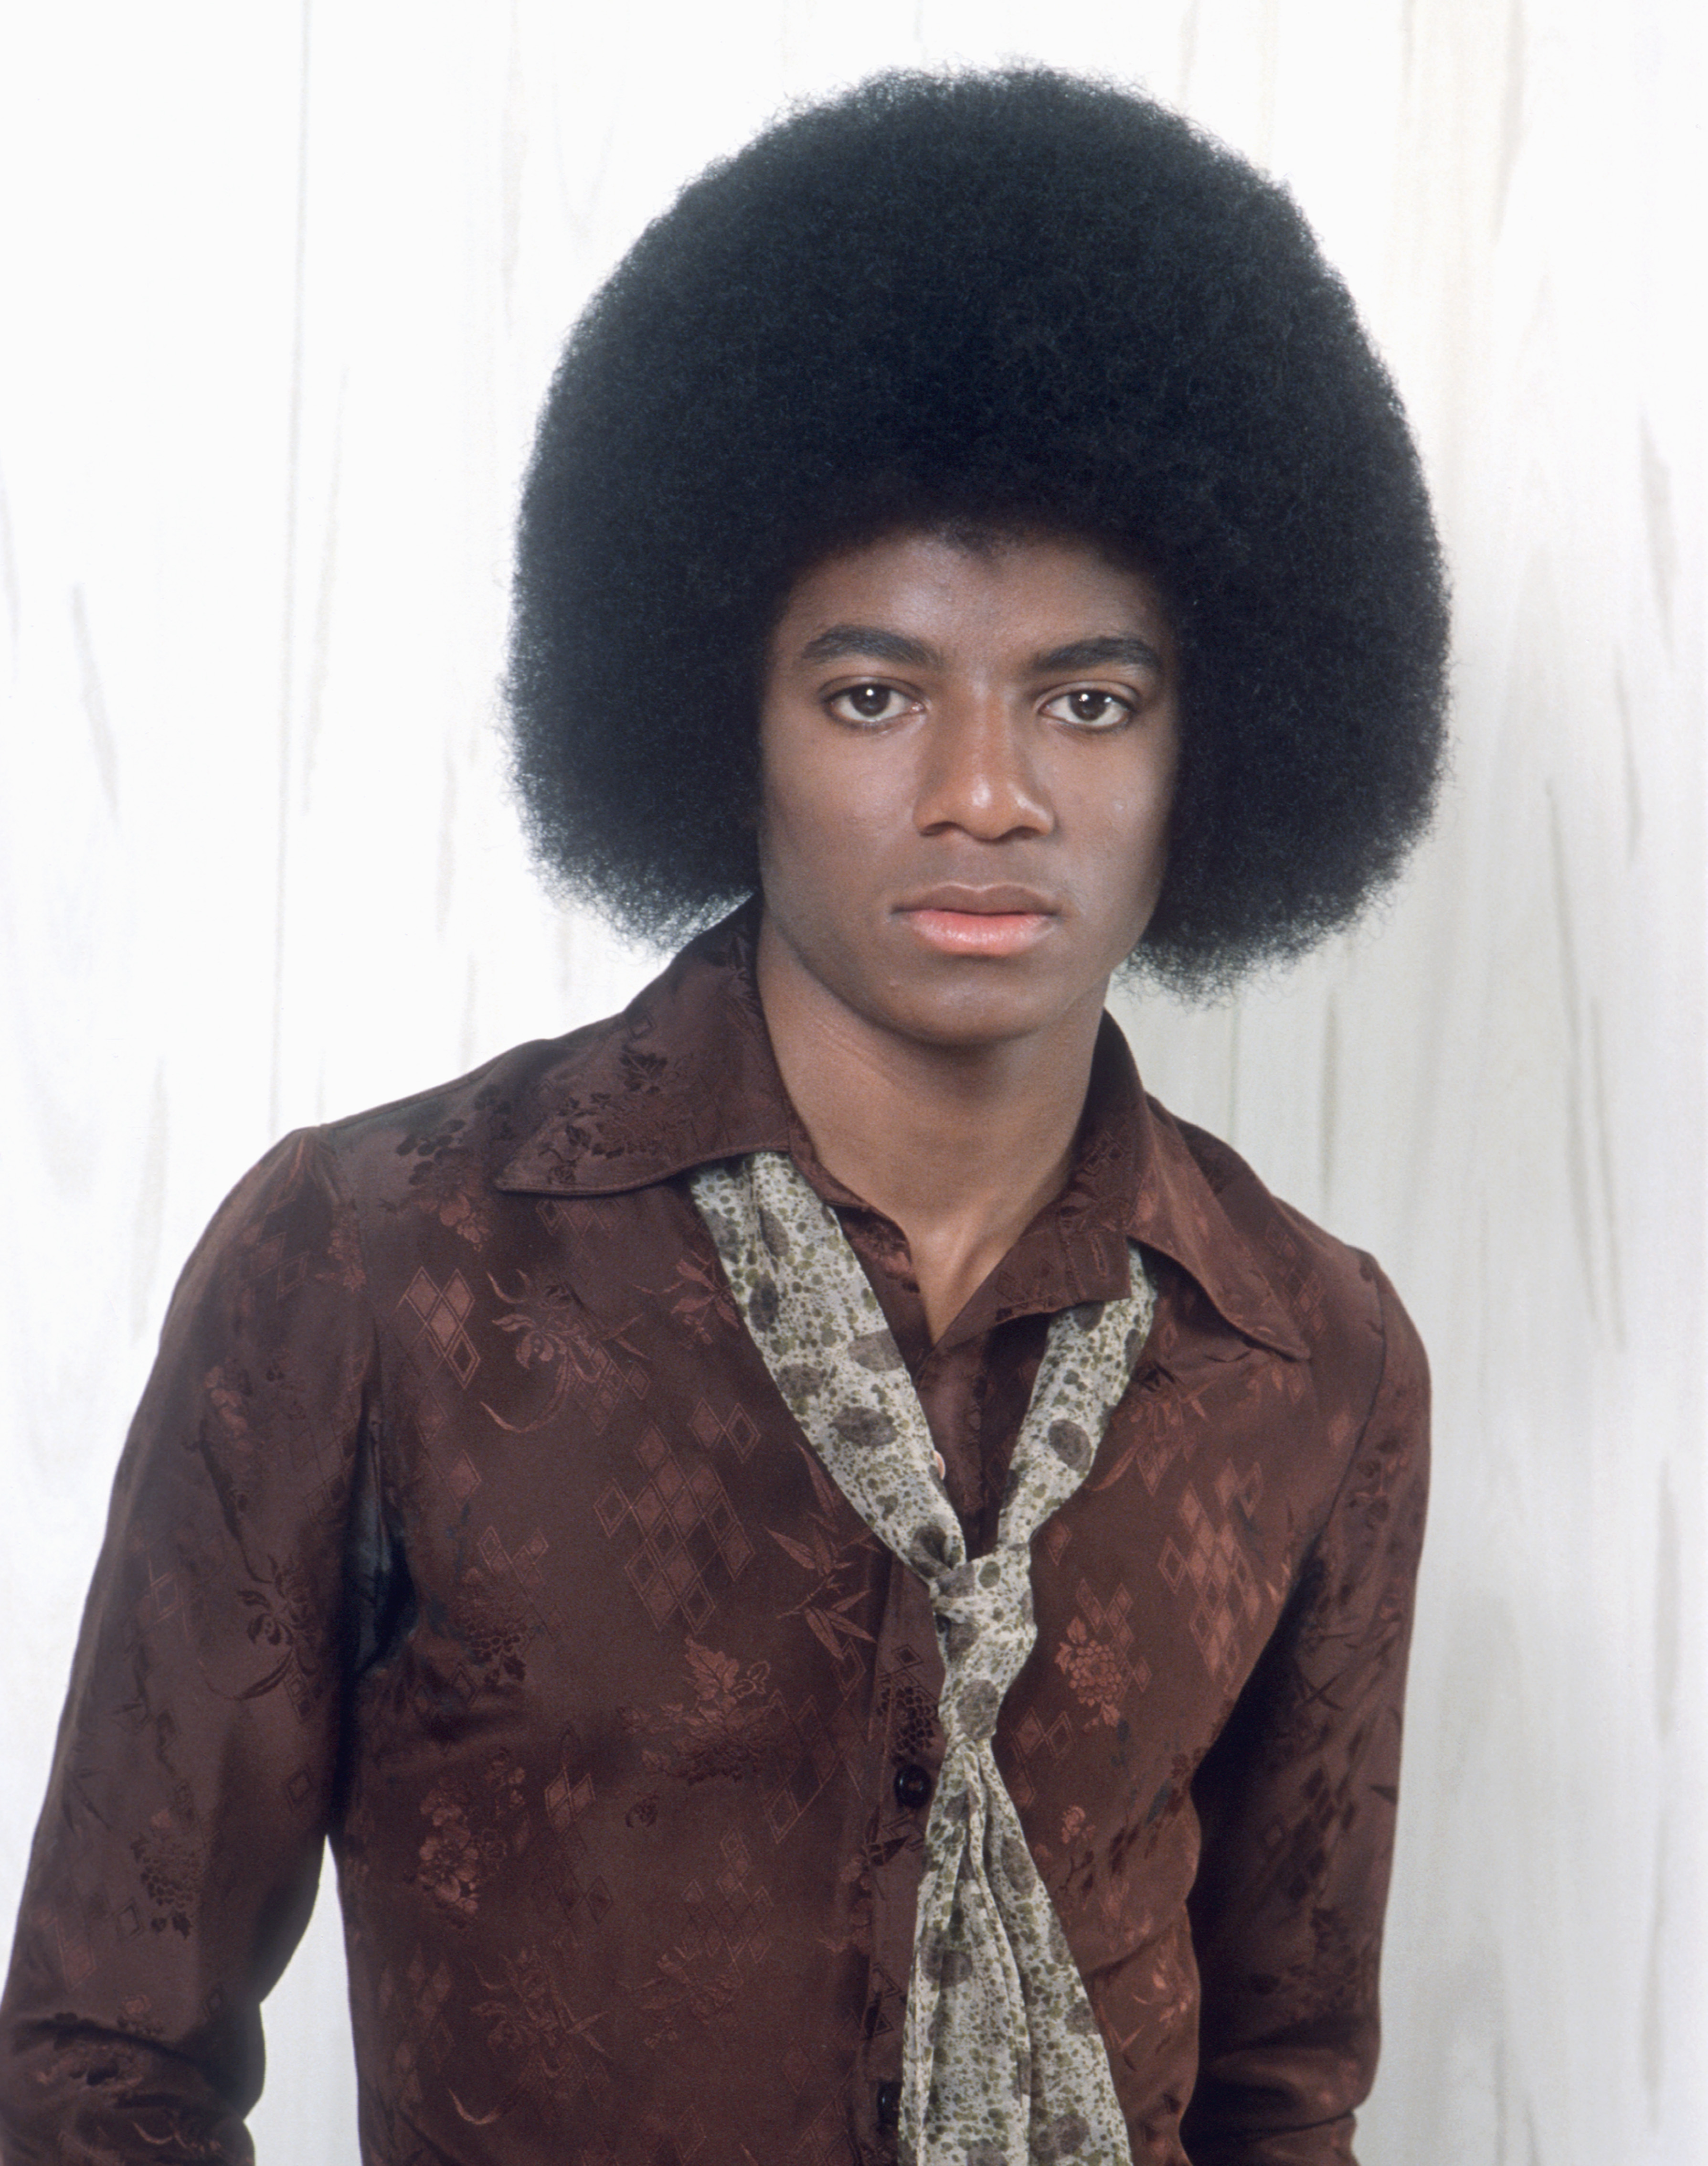 Michael Jackson poses for a portrait on July 7, 1978 in Los Angeles, California. | Source: Getty Images